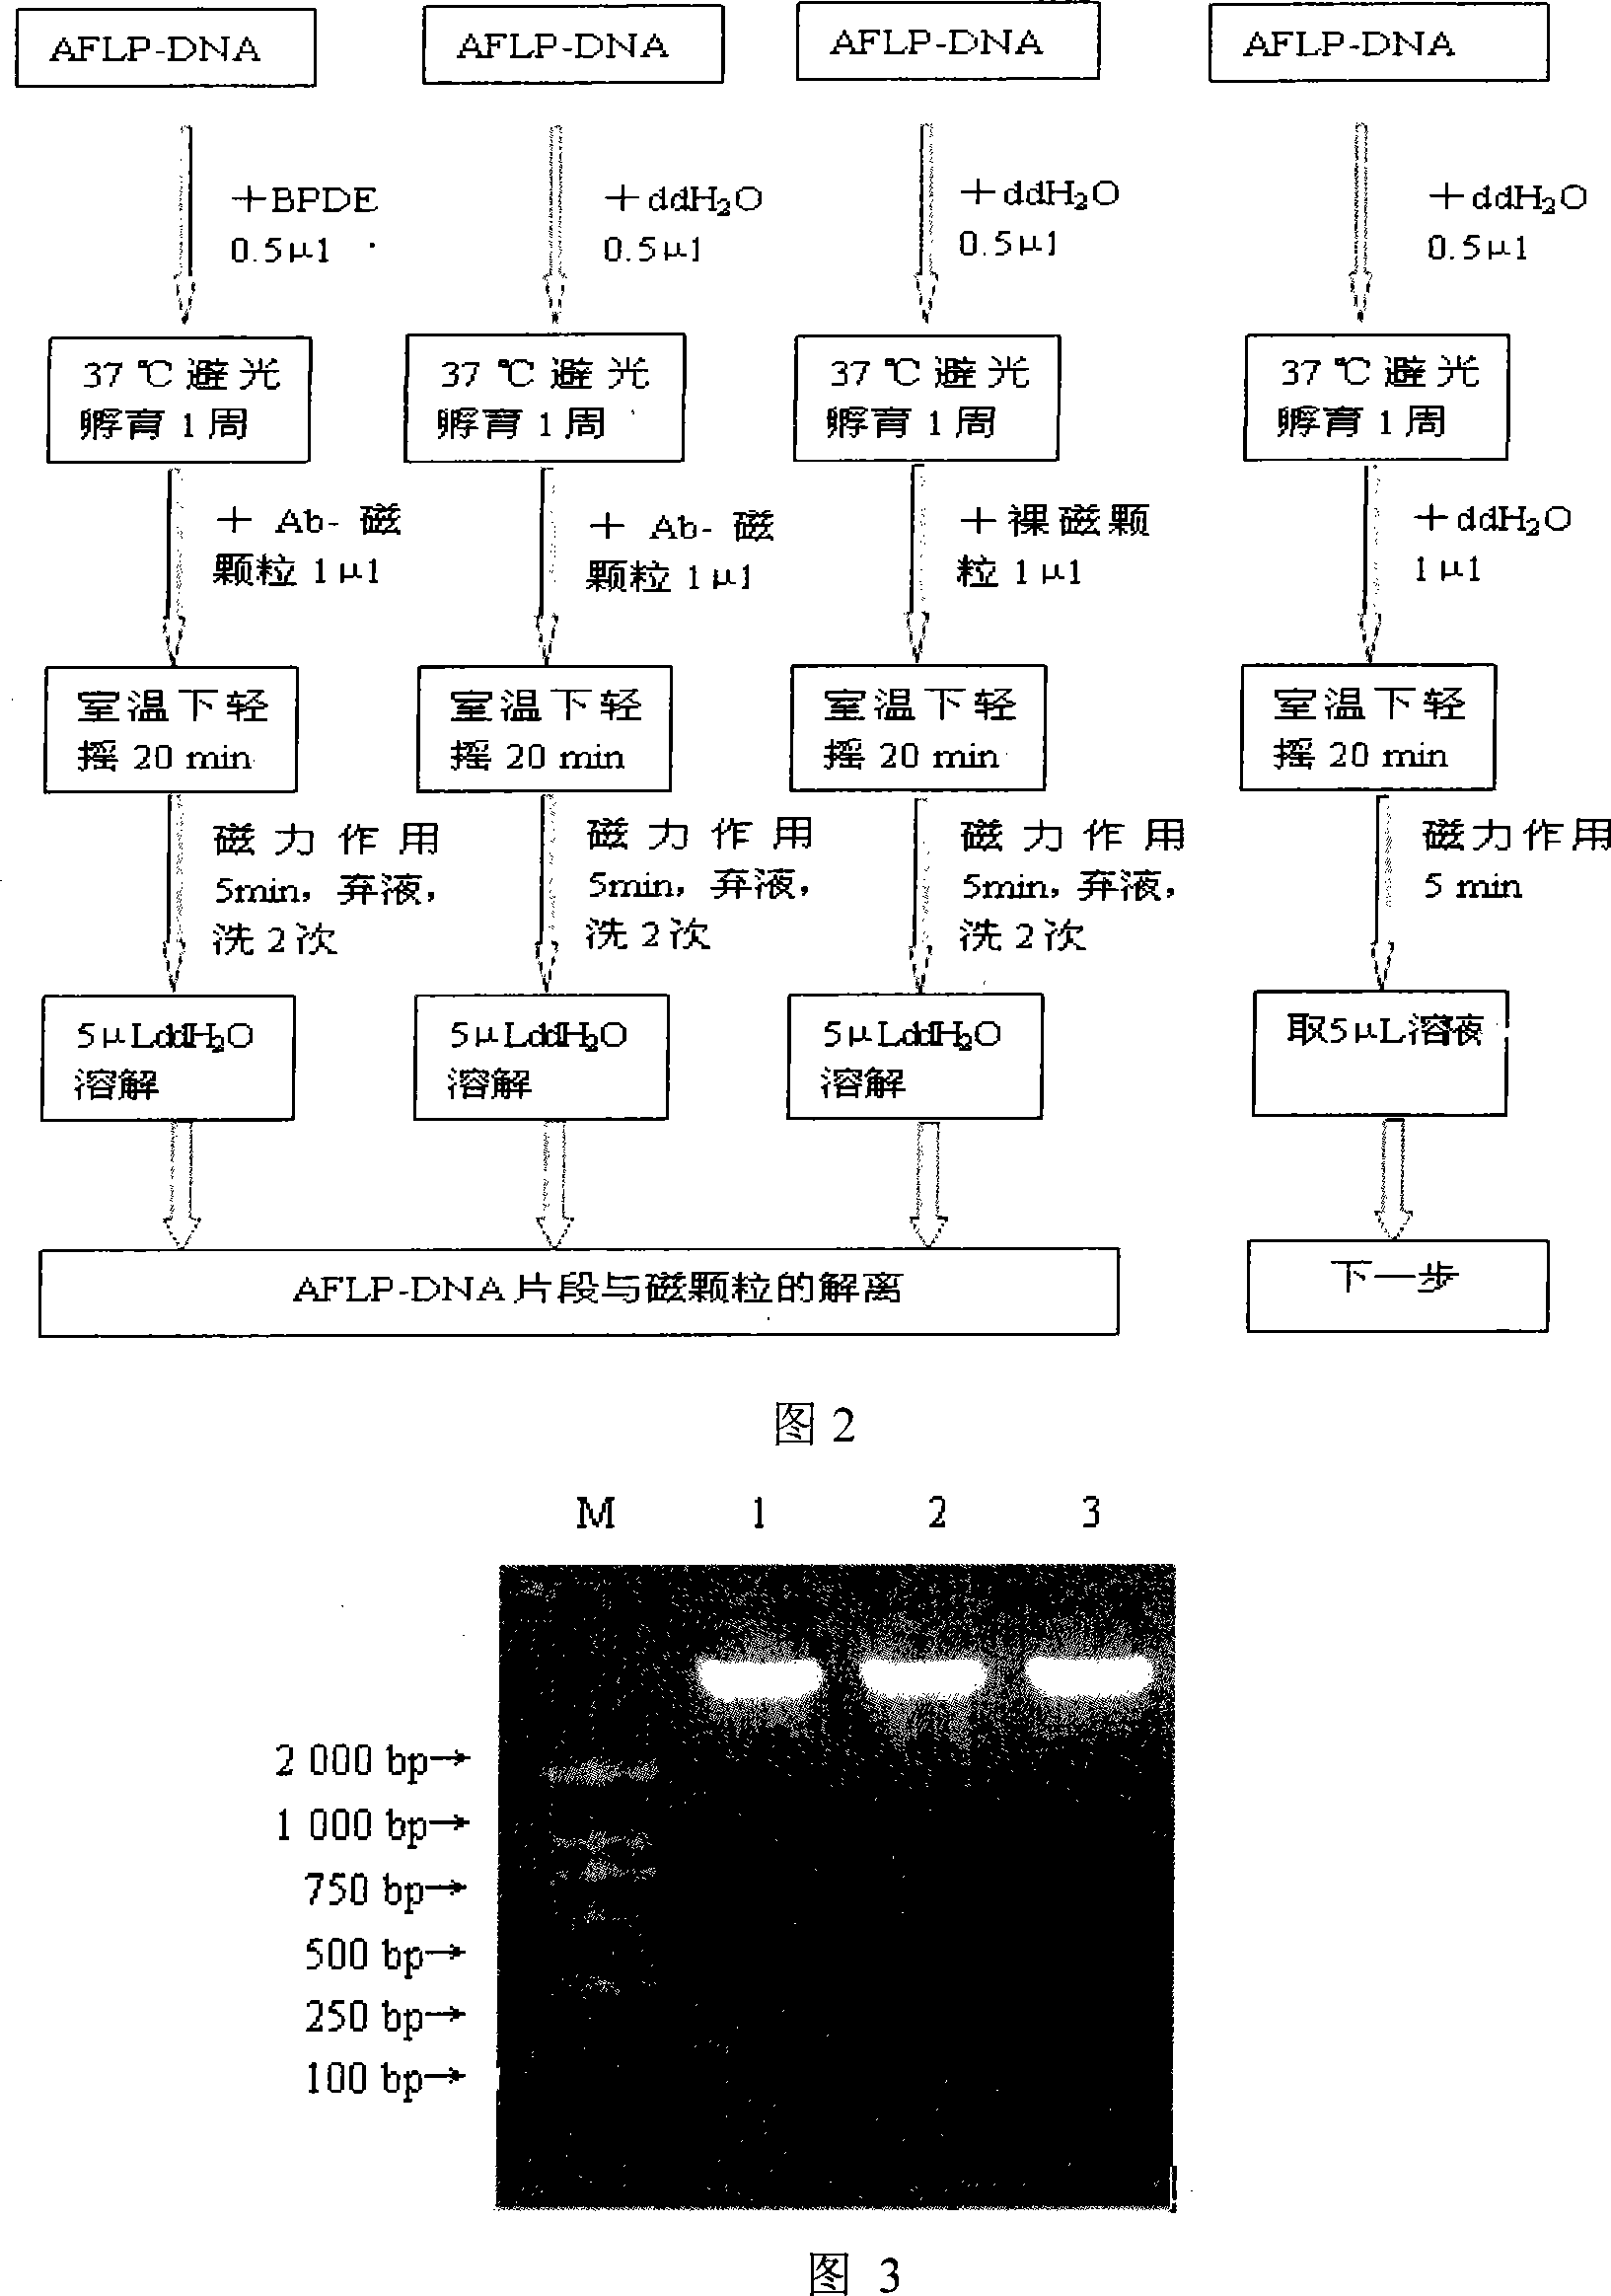 Whole-genom sifting method for BPDE carcinogen related gene